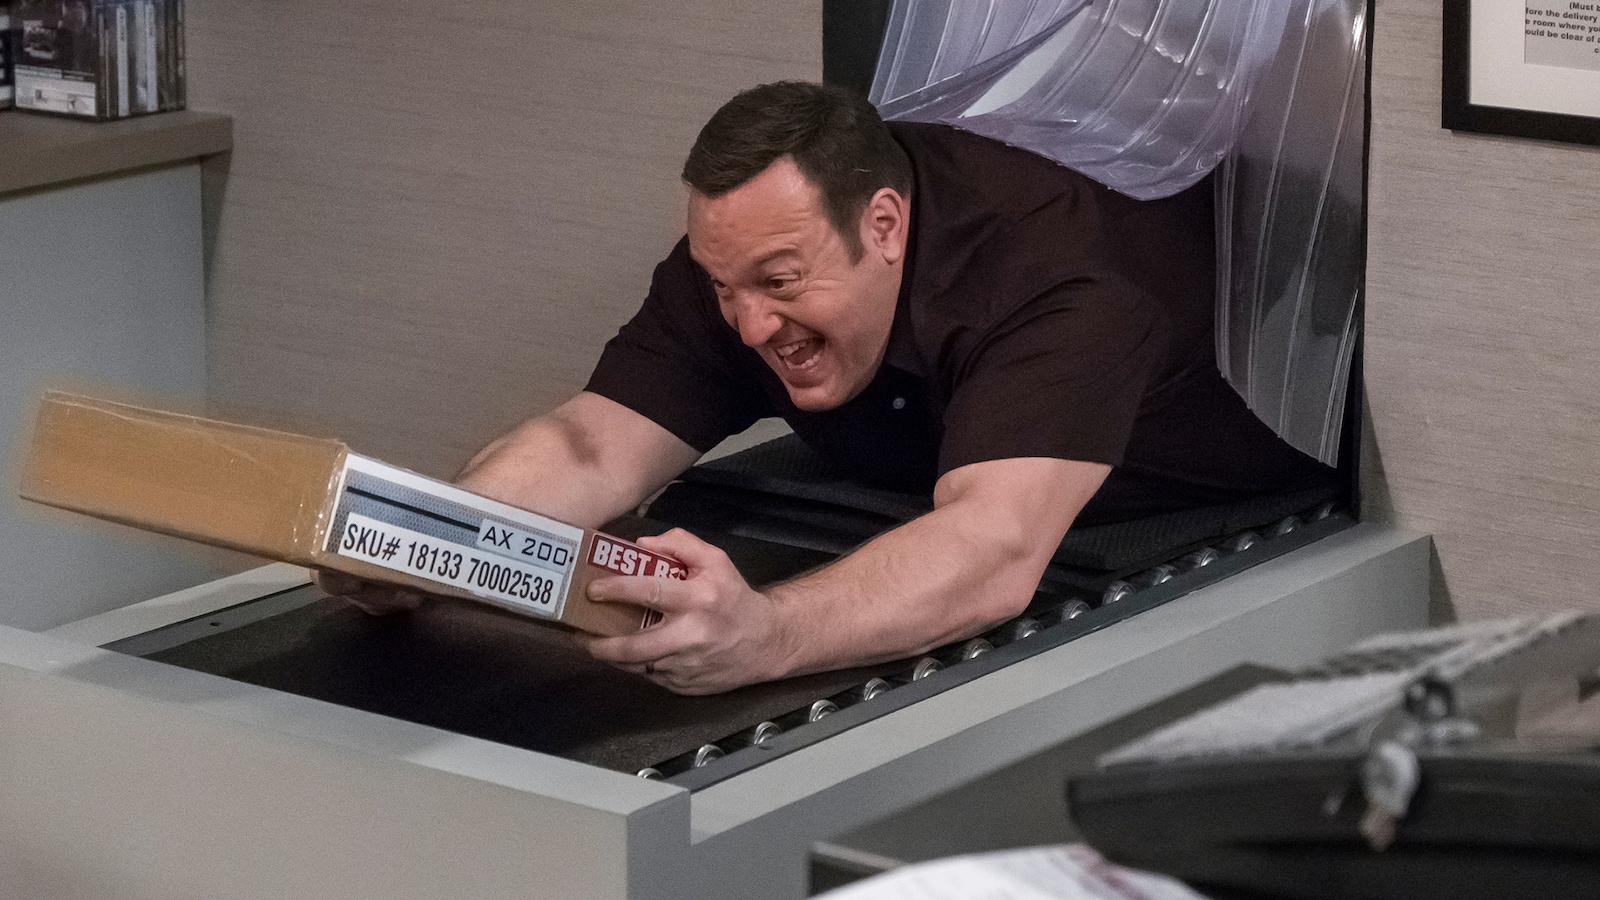 Kevin can wait. Kevin can вещи. Work can wait